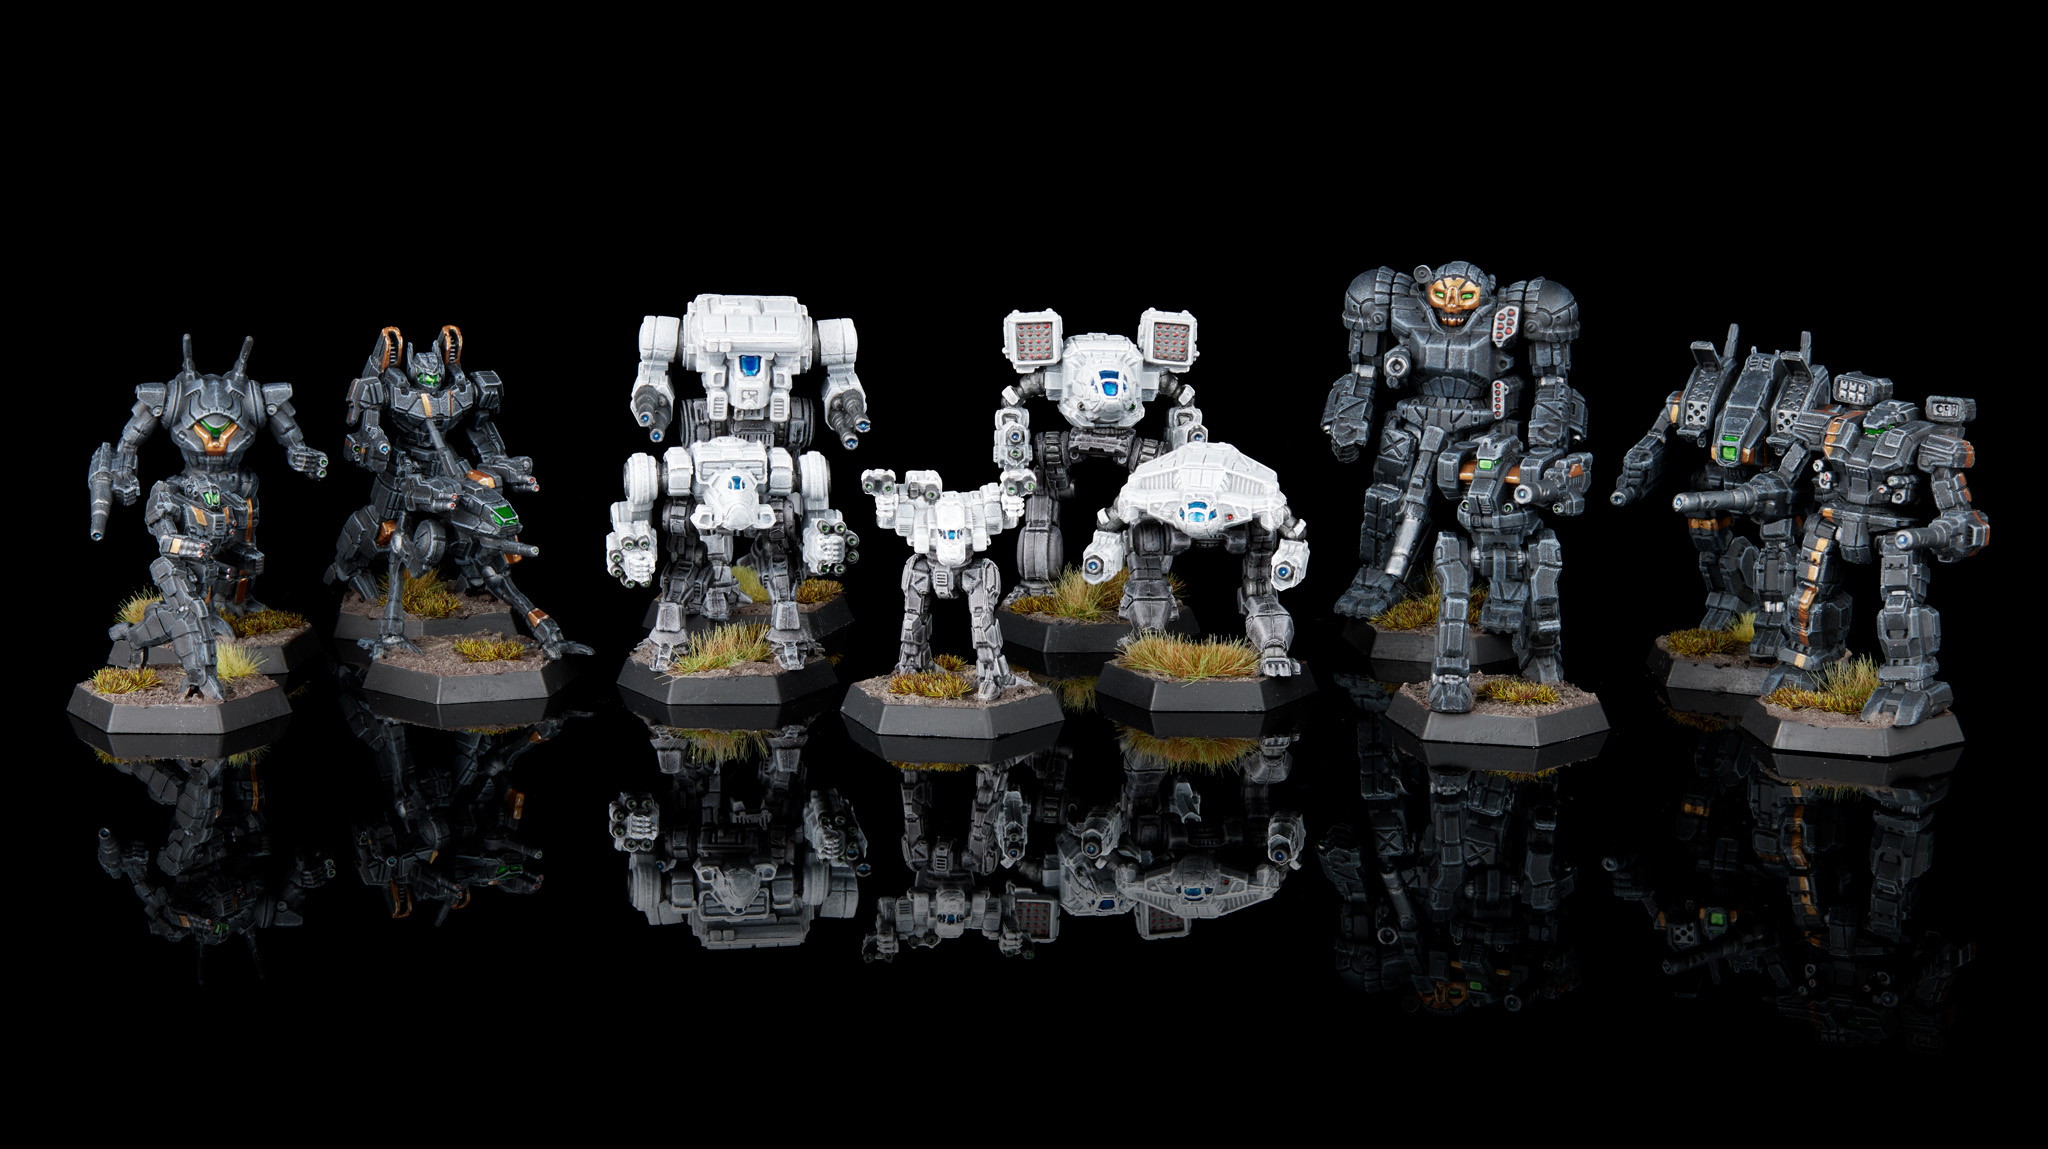 BattleTech's two excellent new starter sets go on sale this week